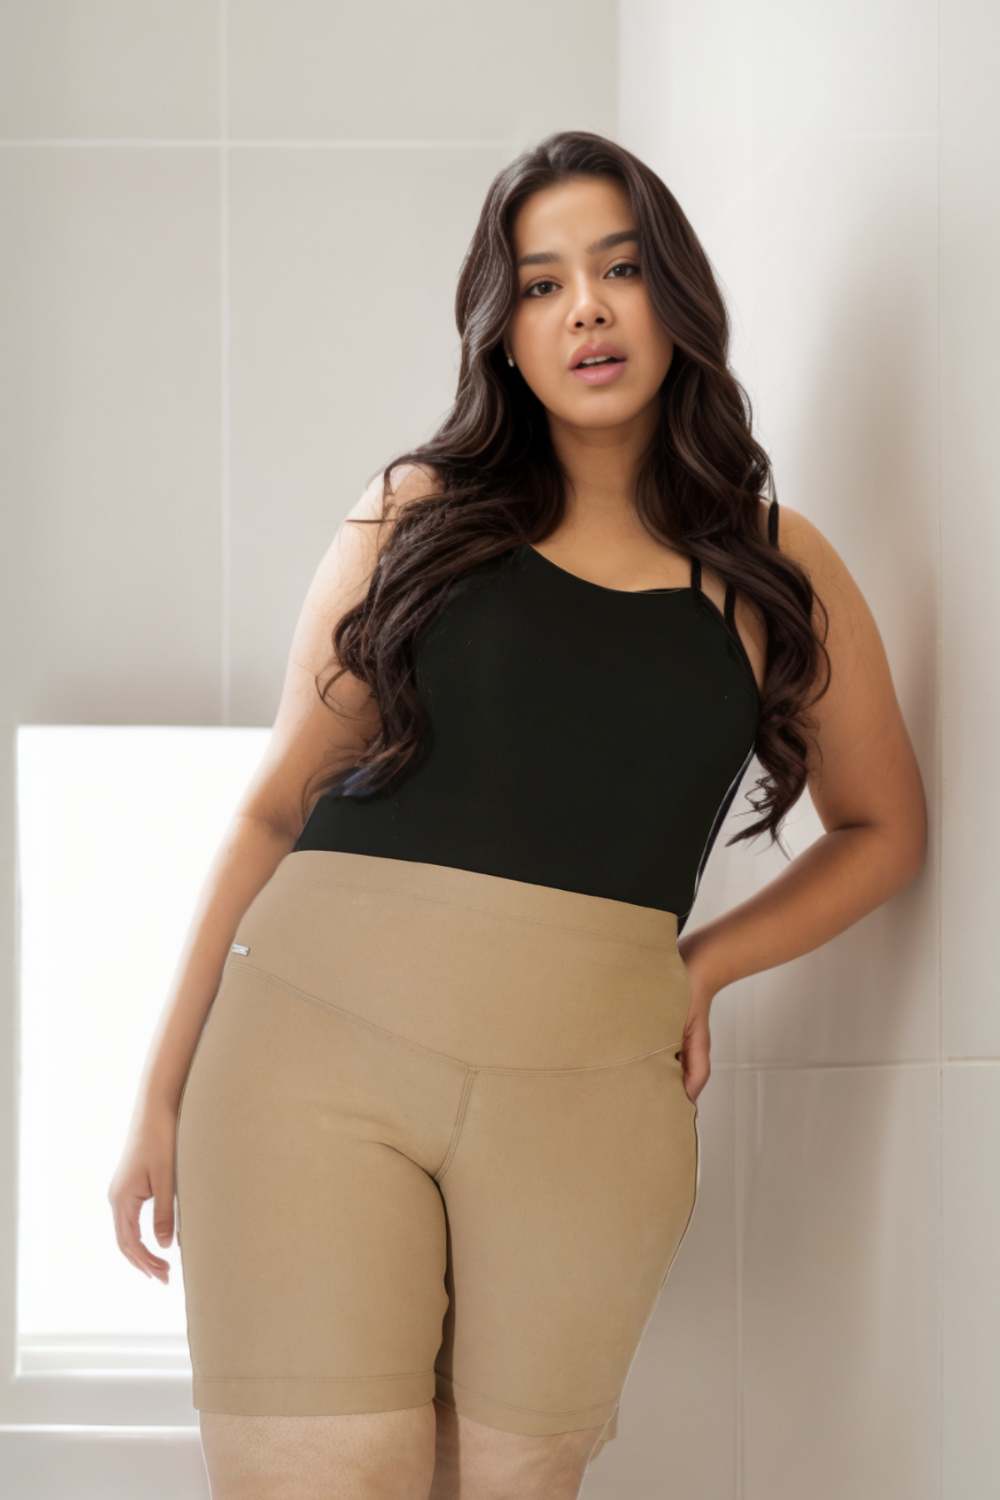 Buy Denfy Women's Cotton Seamless Tummy Control Panties Blended high Waist  Thigh Ladies Shapewear Half Body Shaper Tummy Tucker(Skin Color) at